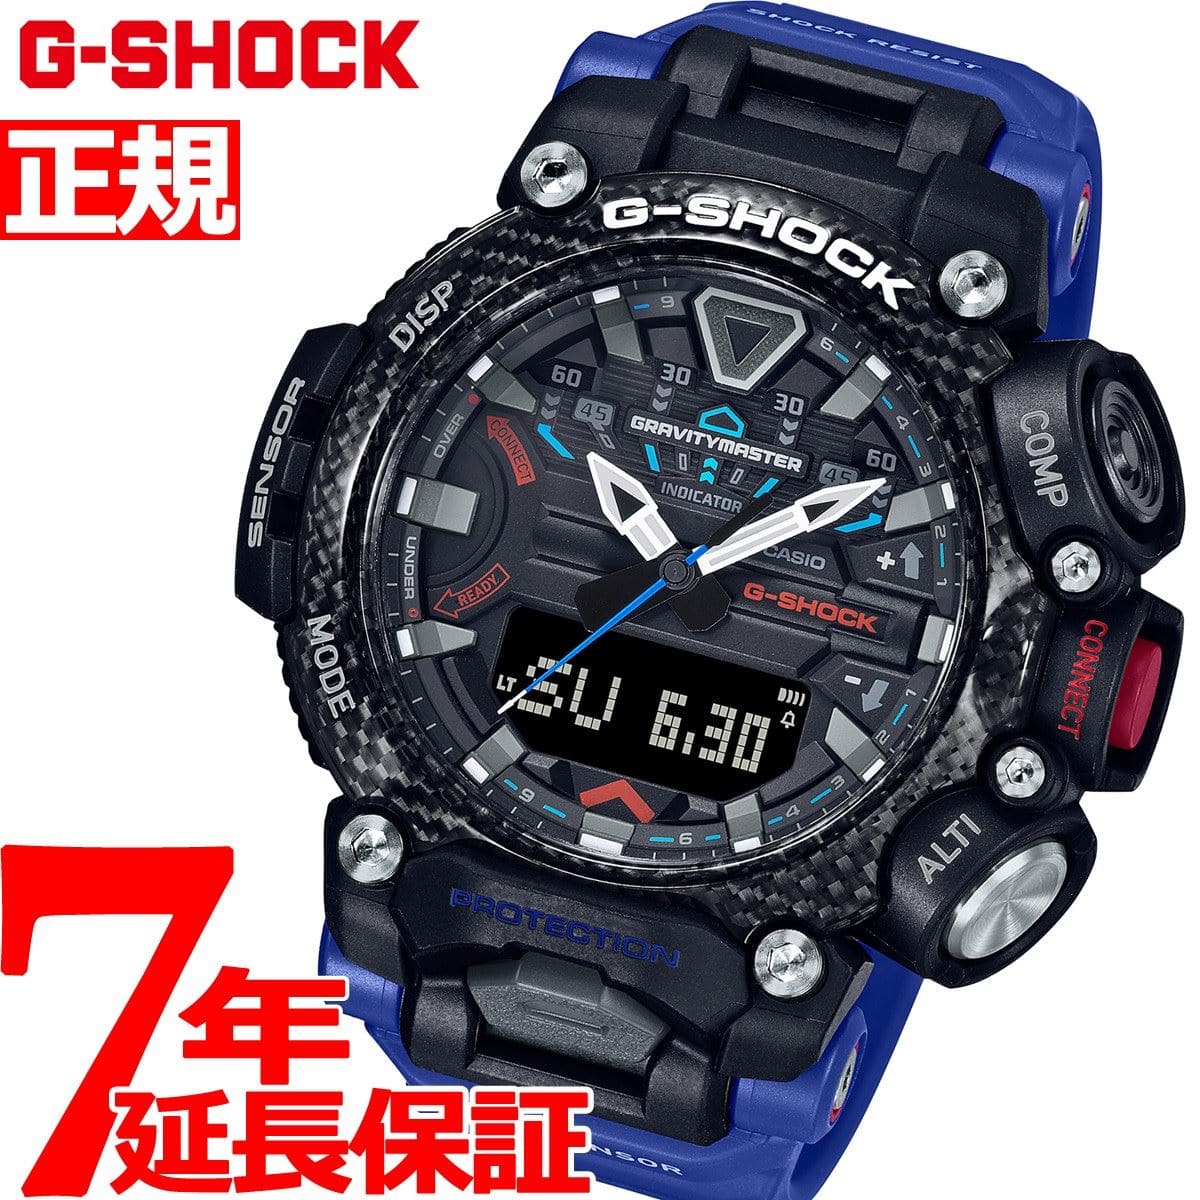 New]2000 & up to 47 times! It is G-SHOCK Casio G-Shock Gravity